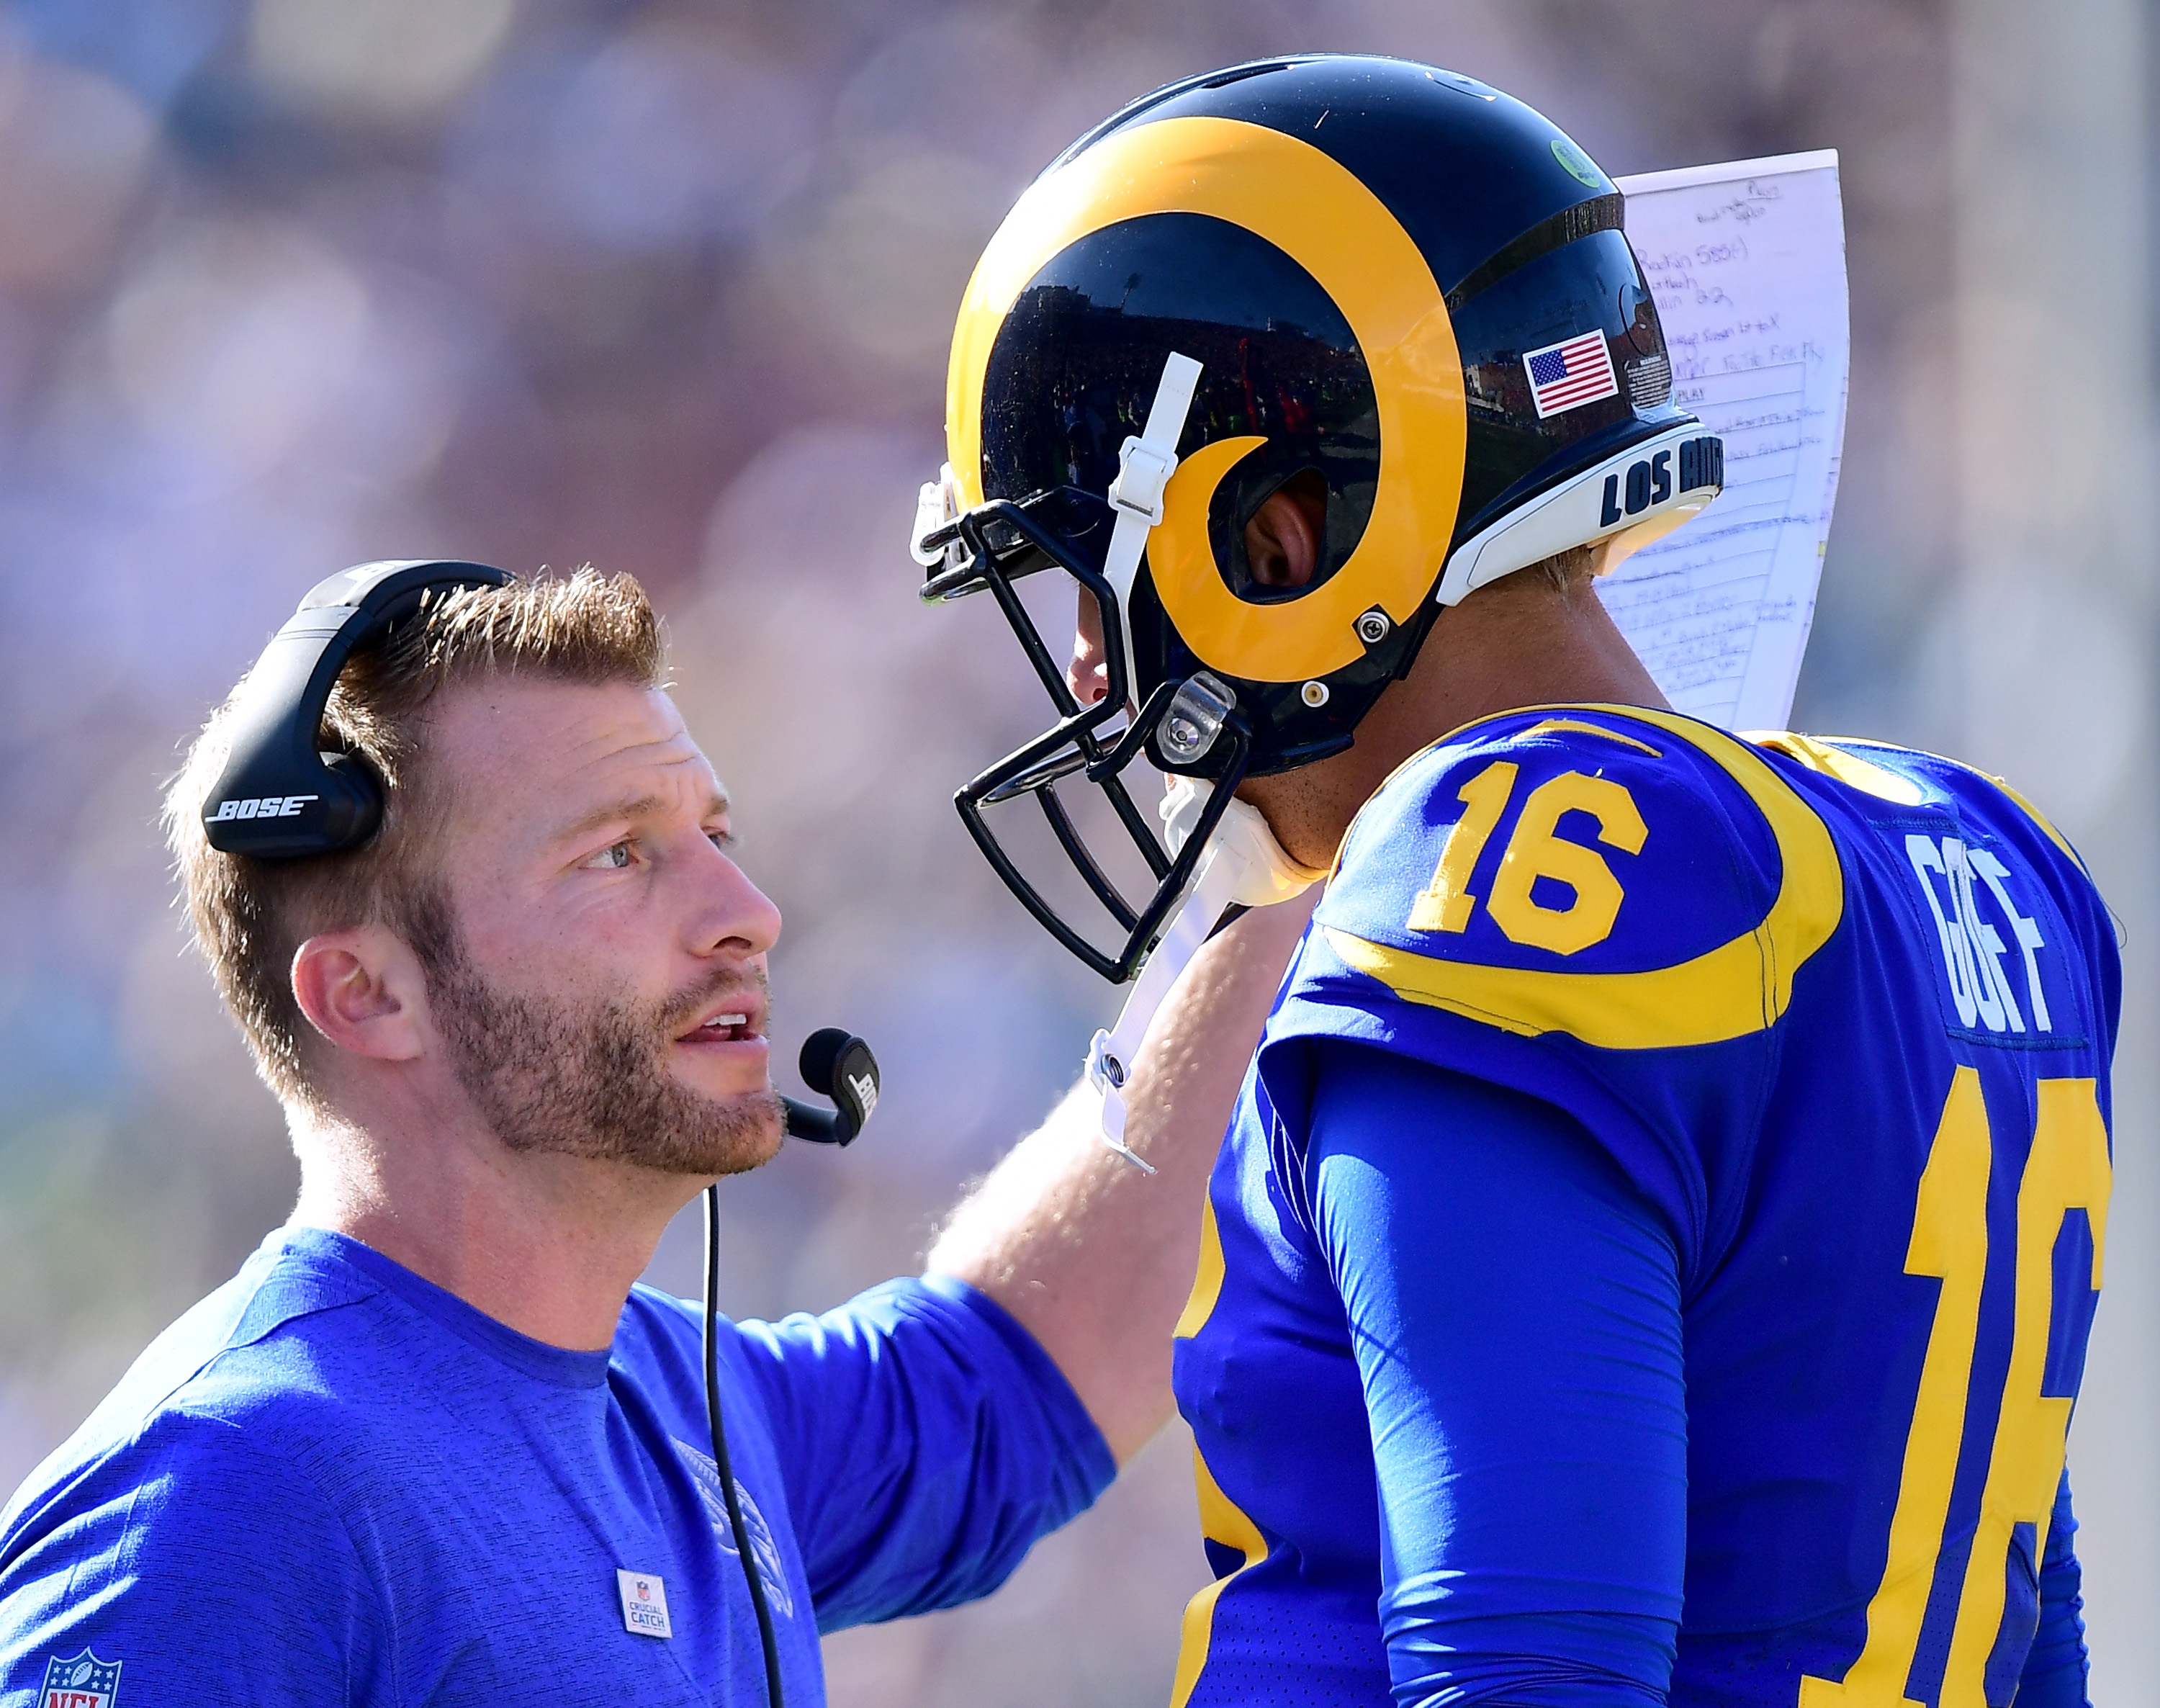 Los Angeles Rams Head Coach Sean McVay and QB Jared Goff talk during the Rams’ Week 5 10-16 loss to the Seattle Seahawks at the Los Angeles Memorial Coliseum, October 8, 2017.